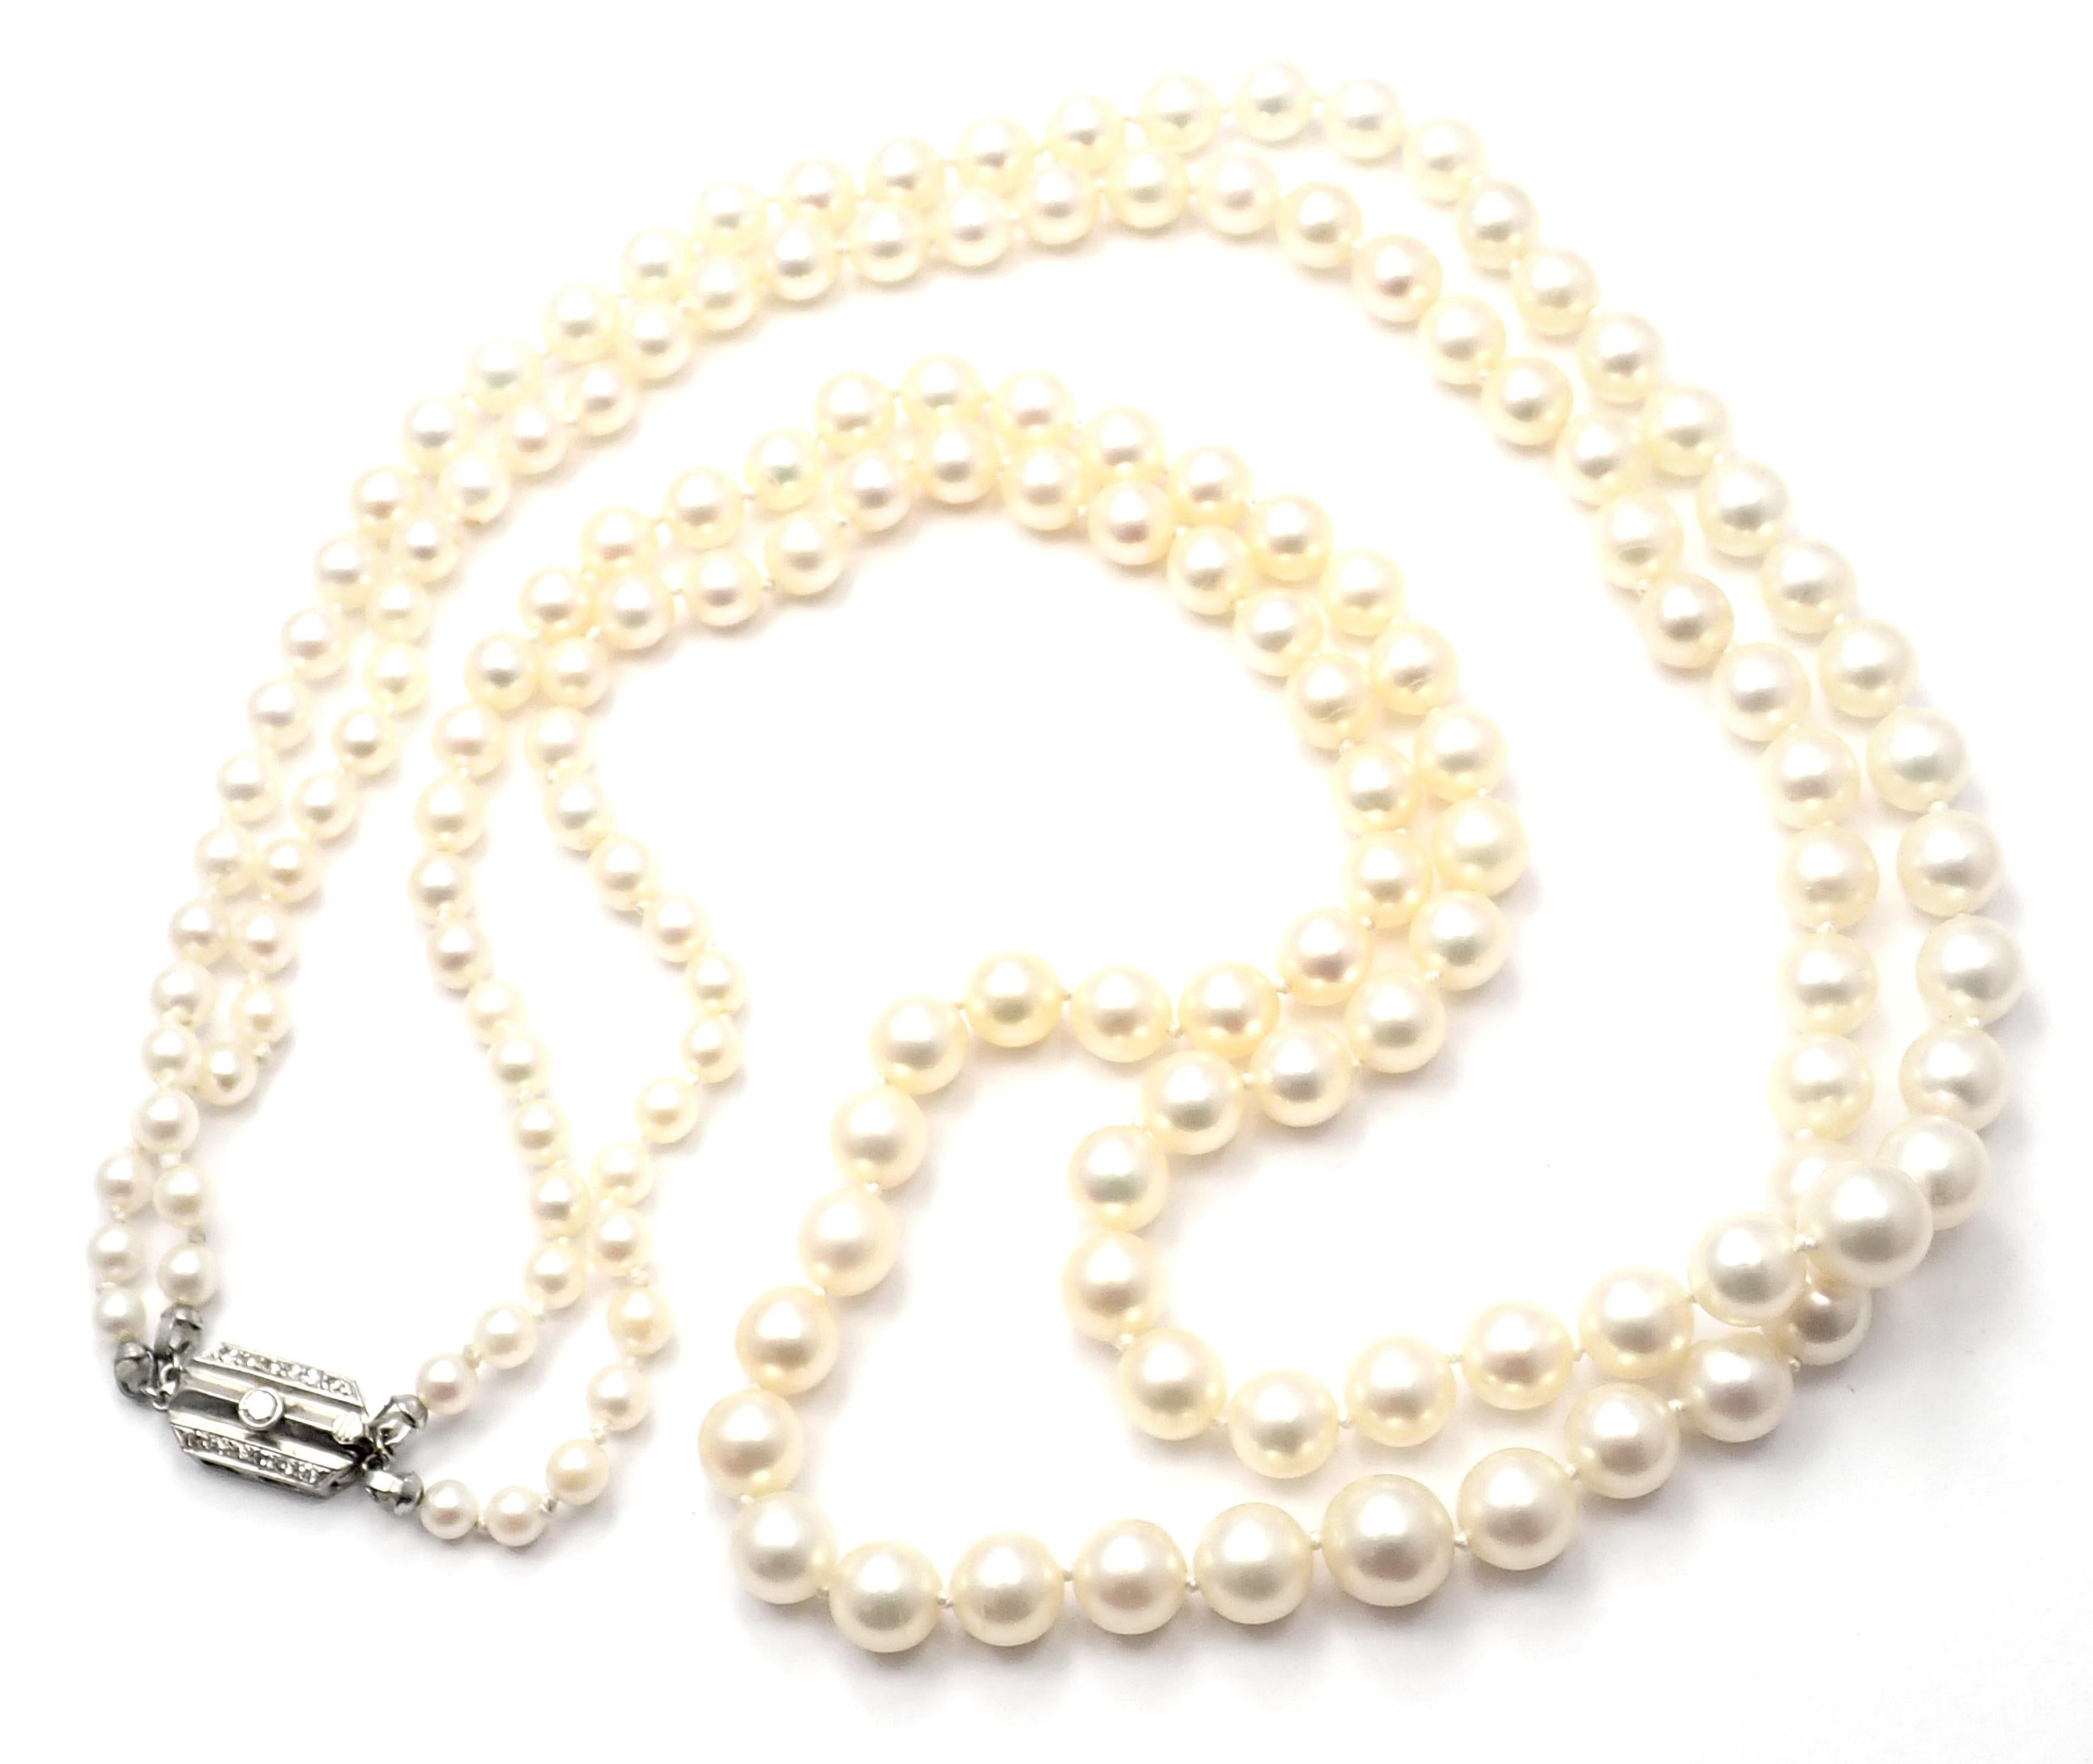 Platinum Diamond Double Strand Pearl Necklace by Mikimoto. 
With pearls that range from 8mm to 4.5mm in diameter on a 22